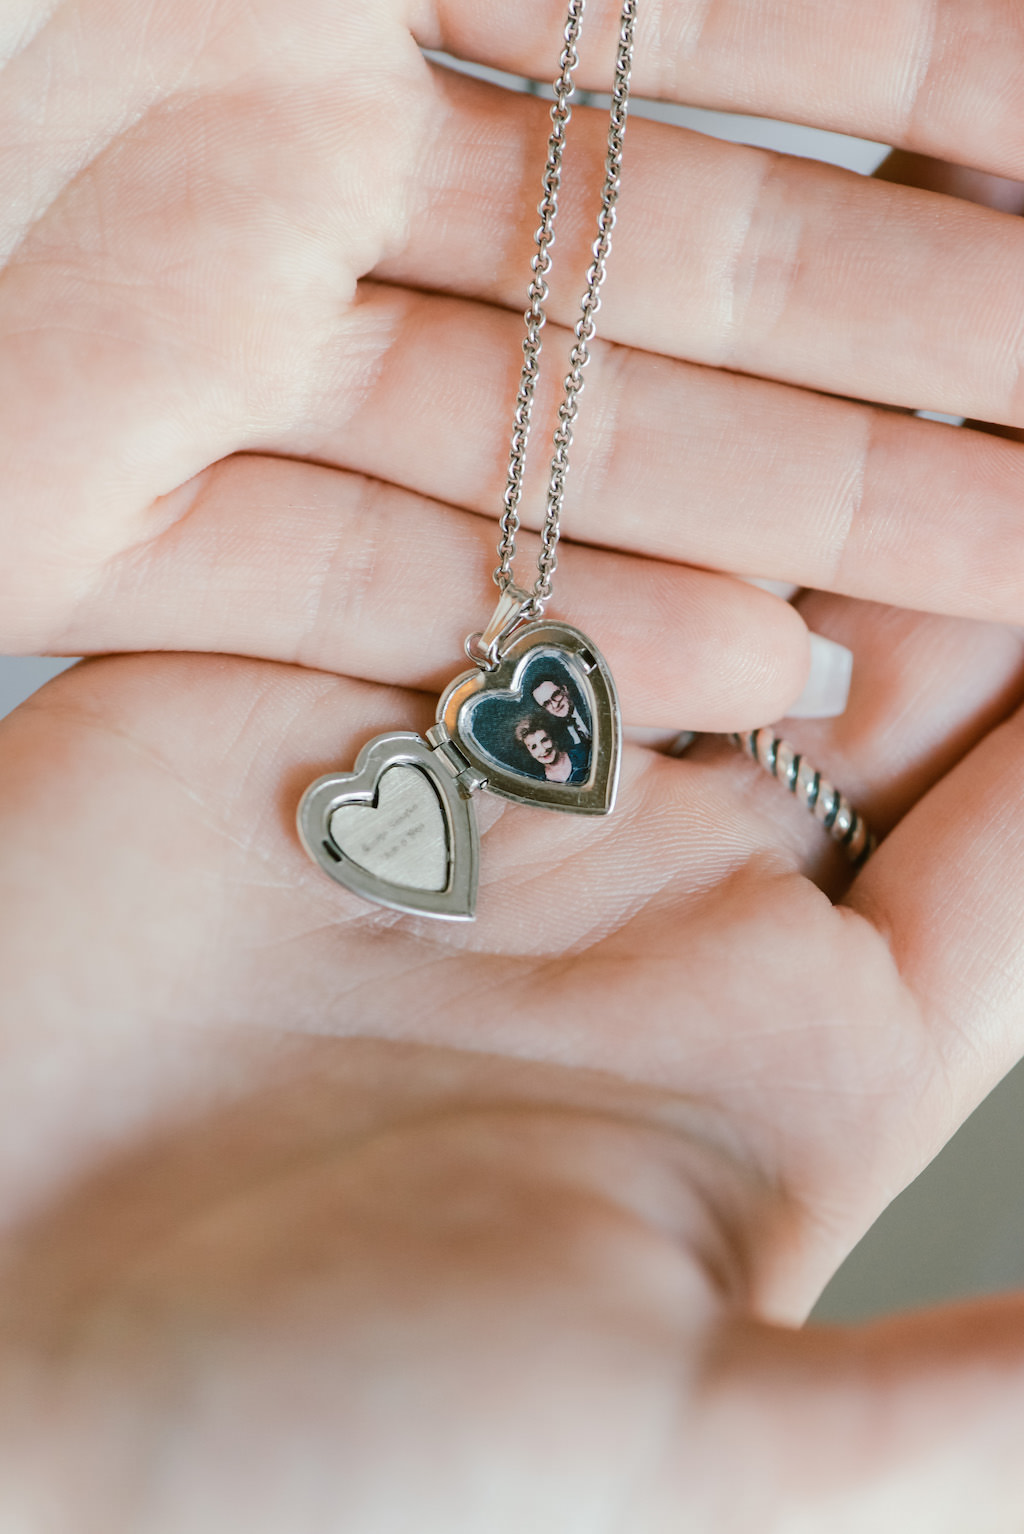 Silver Heart Locket Locket Personalized with Engraving and Picture